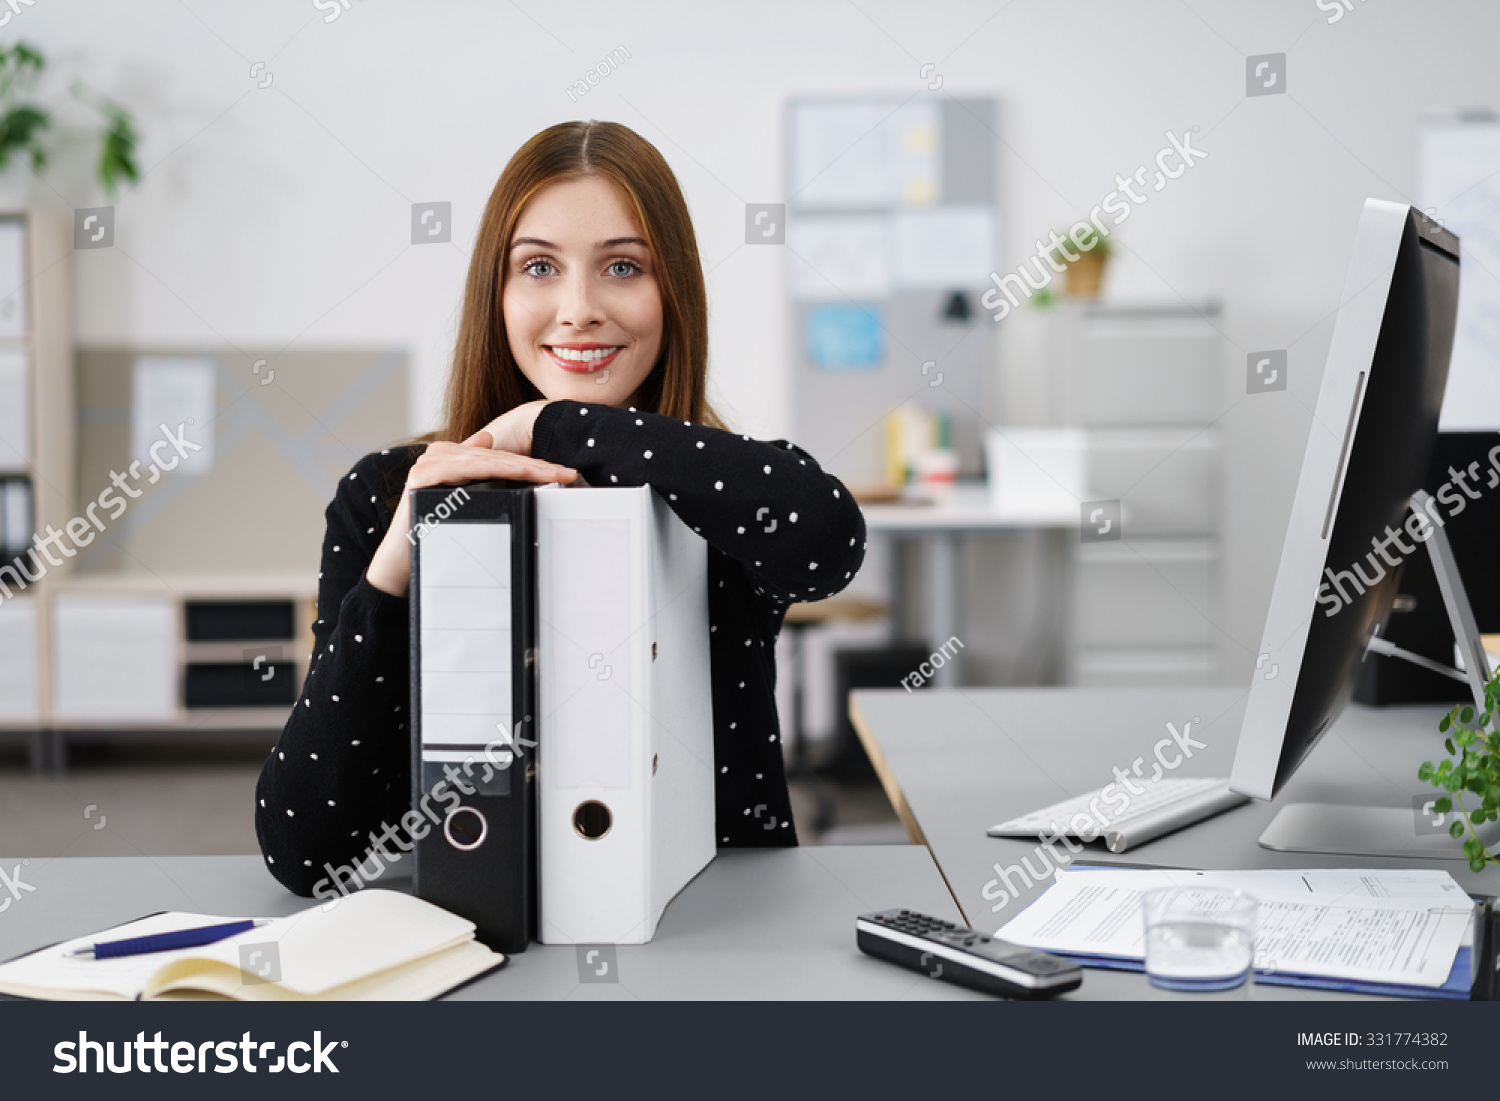 relaxed businesswoman leaning on black and white folders #331774382